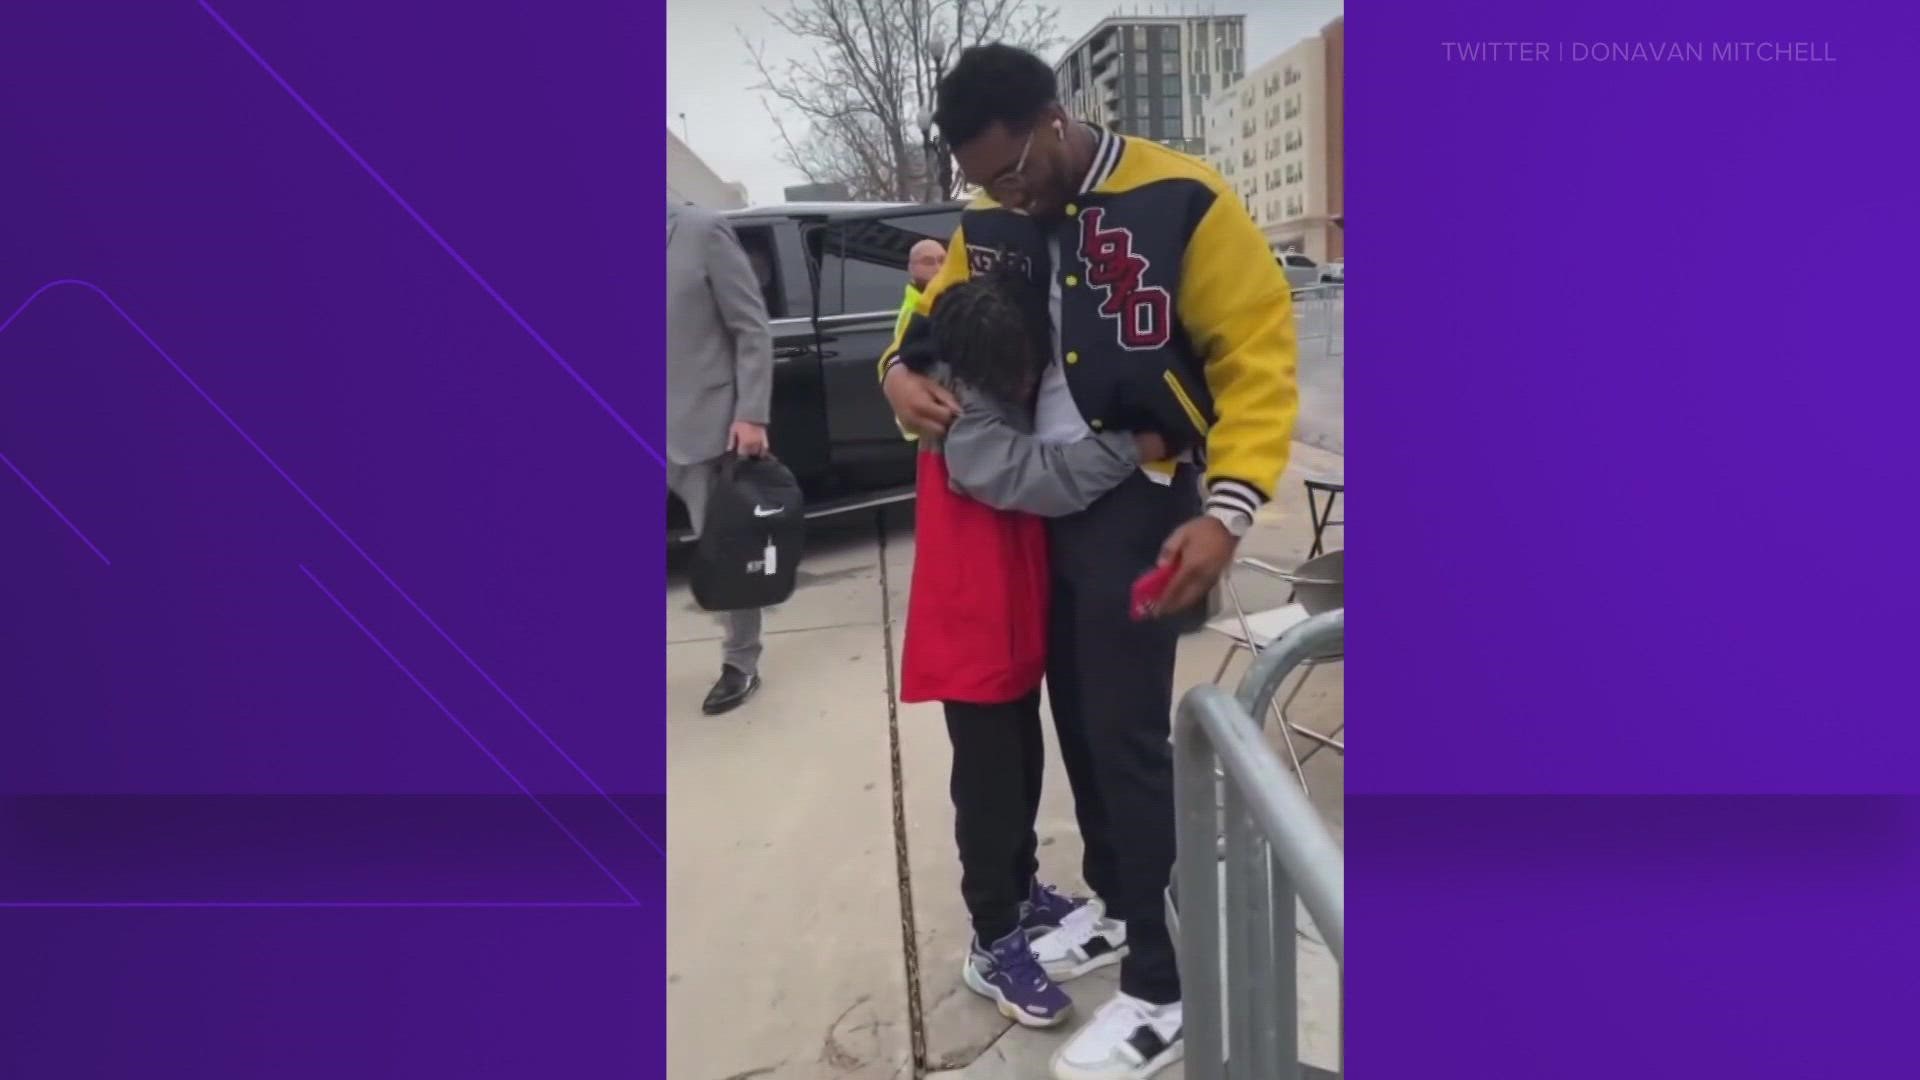 Donovan Mitchell met a young fan outside the Cavaliers arena and what happened next made both of their days a little better.